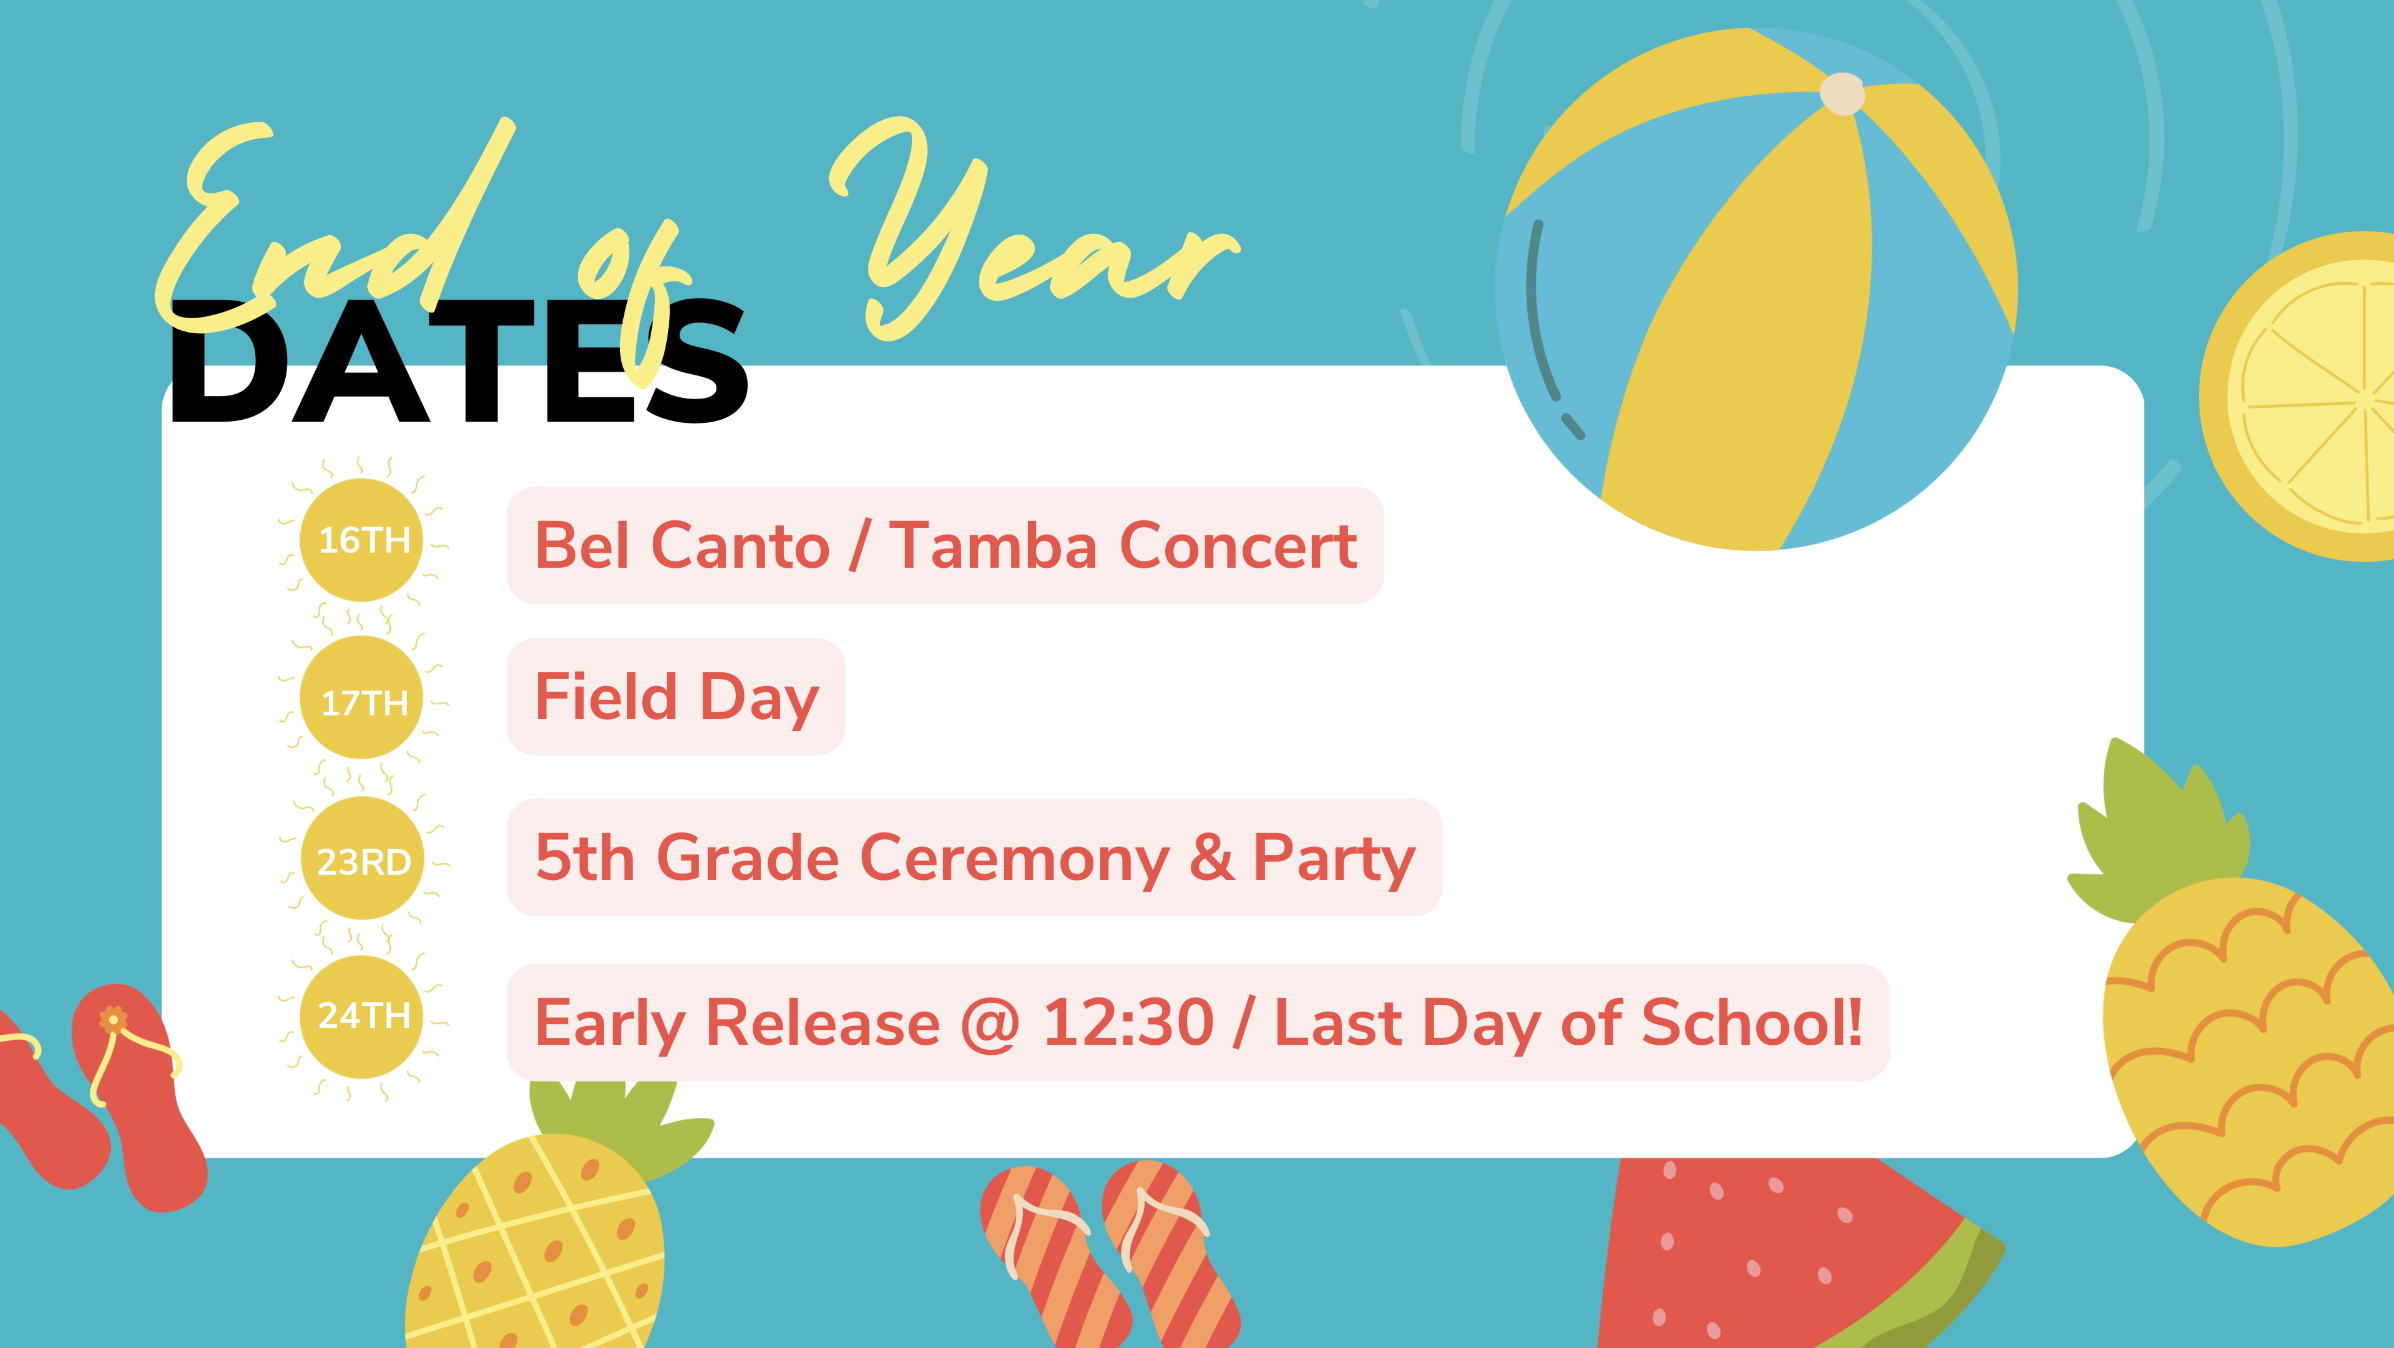 End of Year Dates